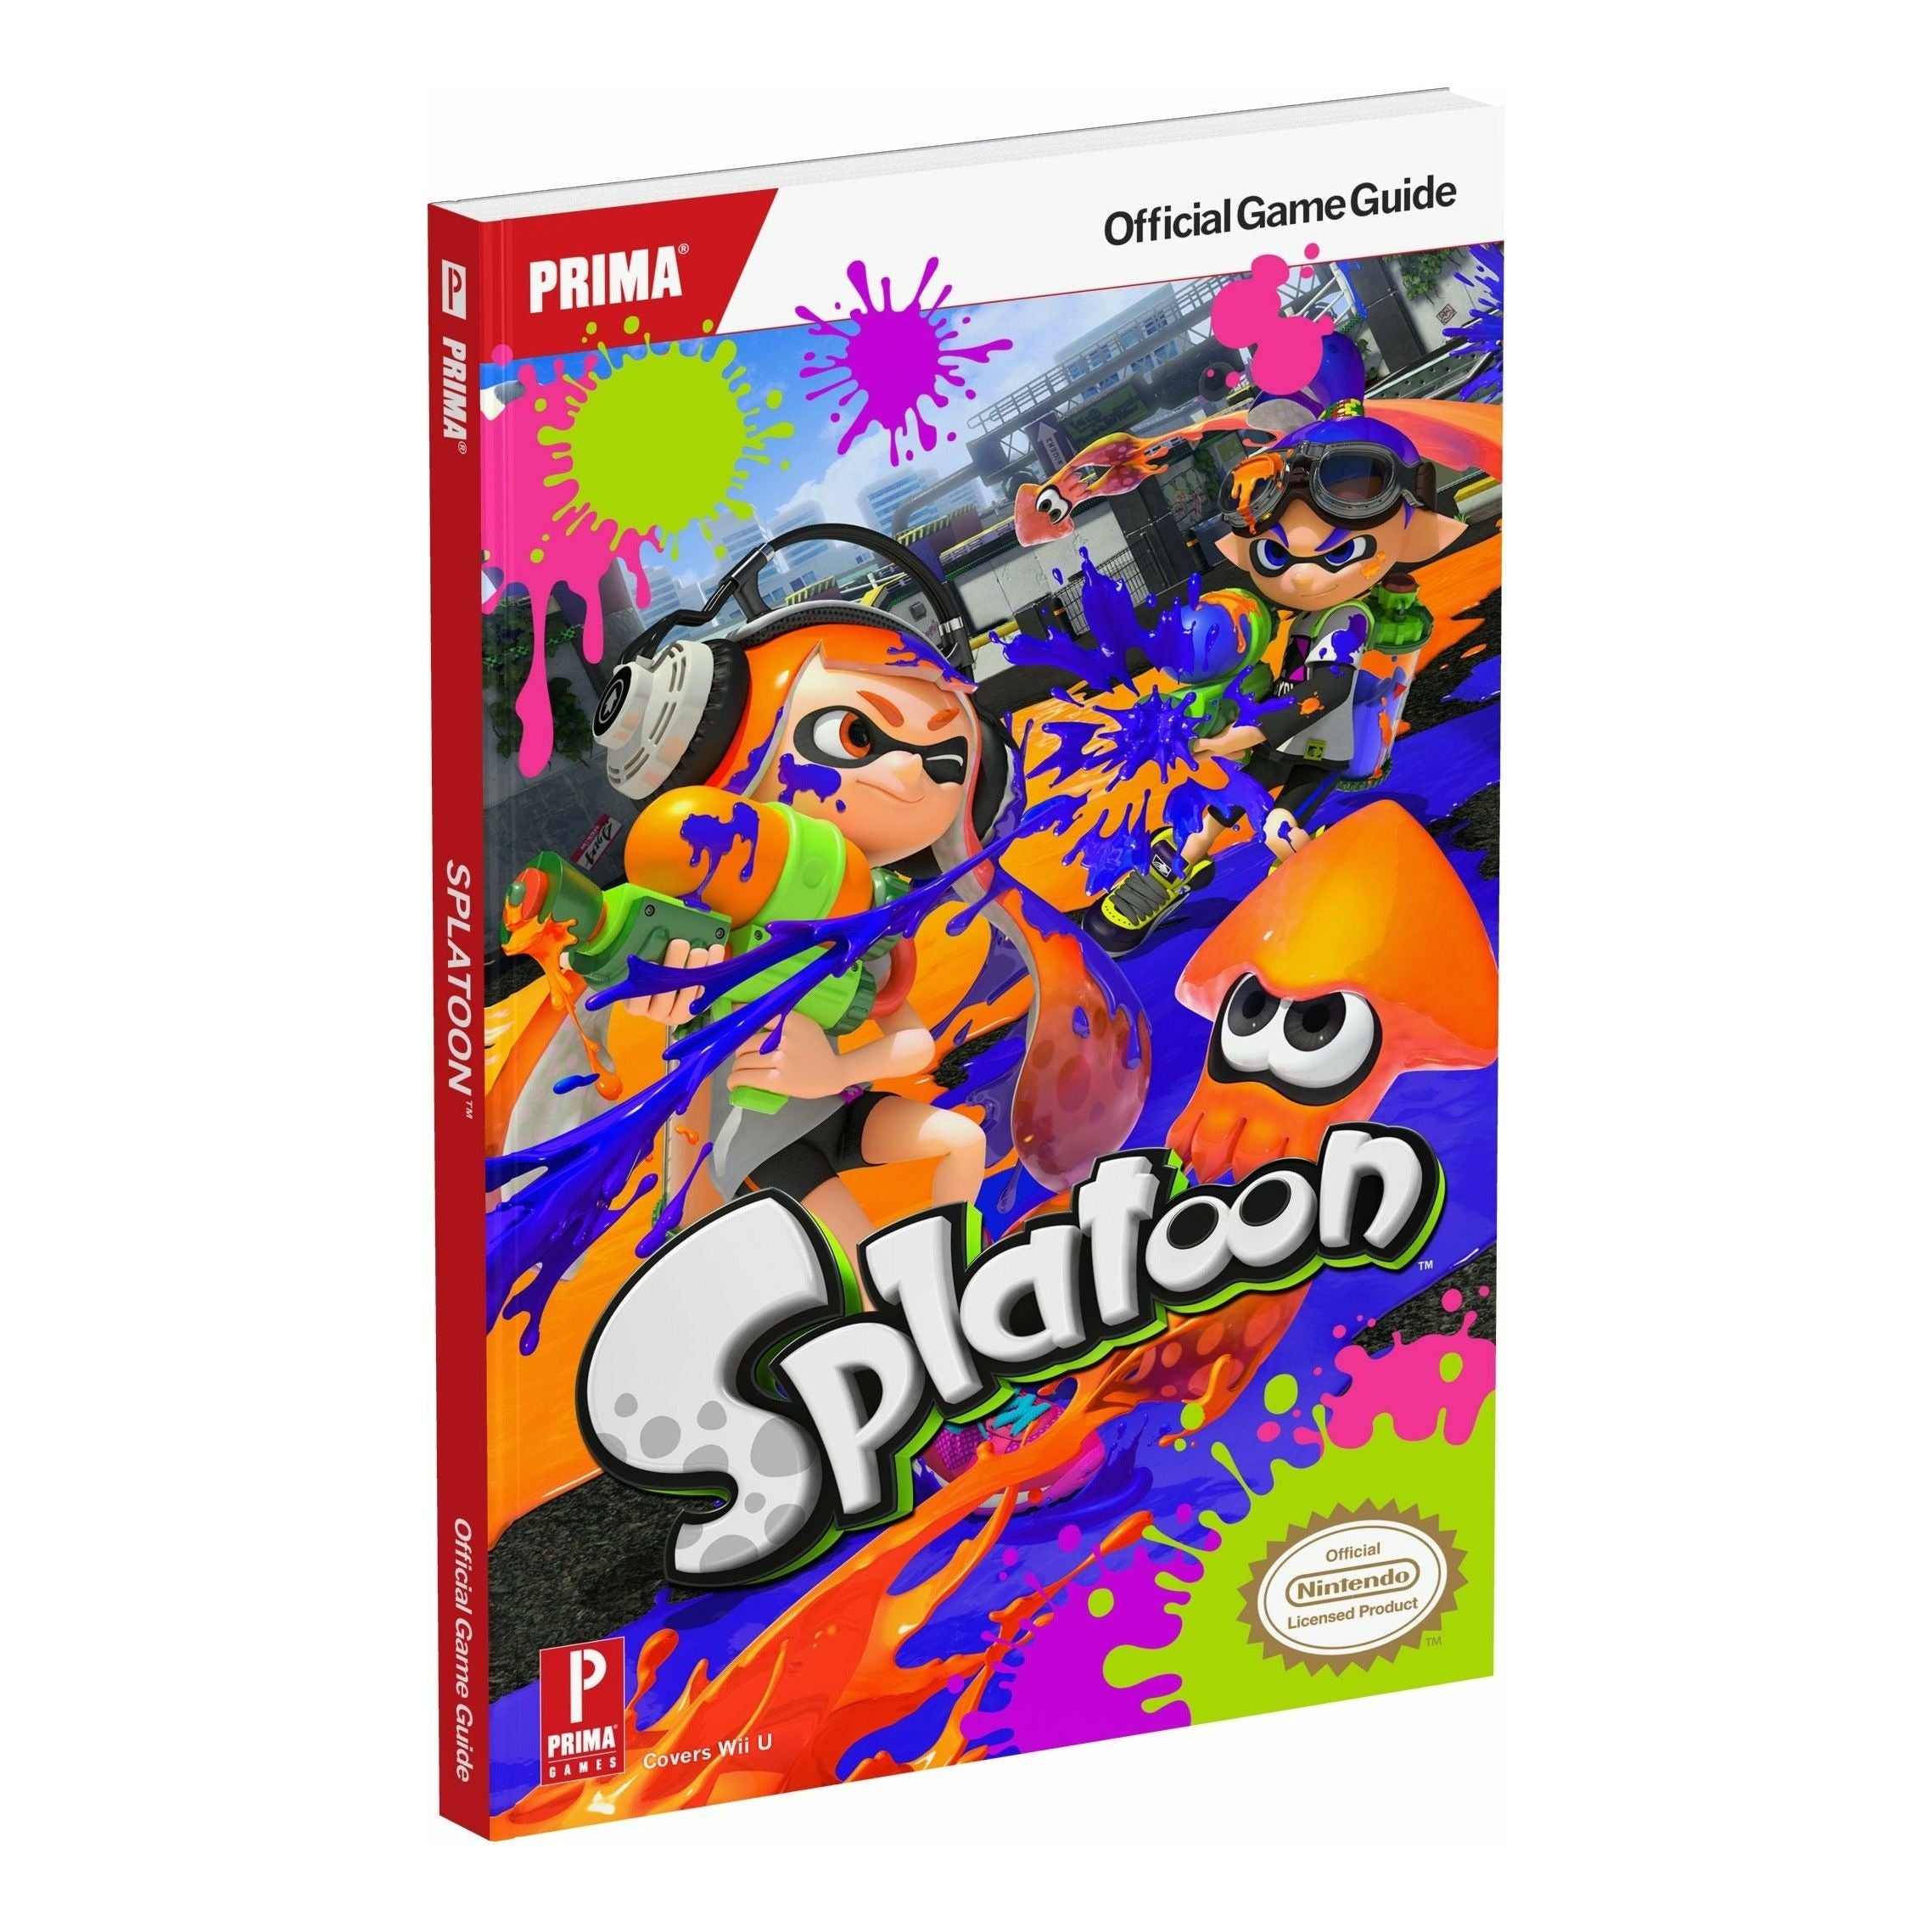 Splatoon Prima Official Game Guide for Wii U